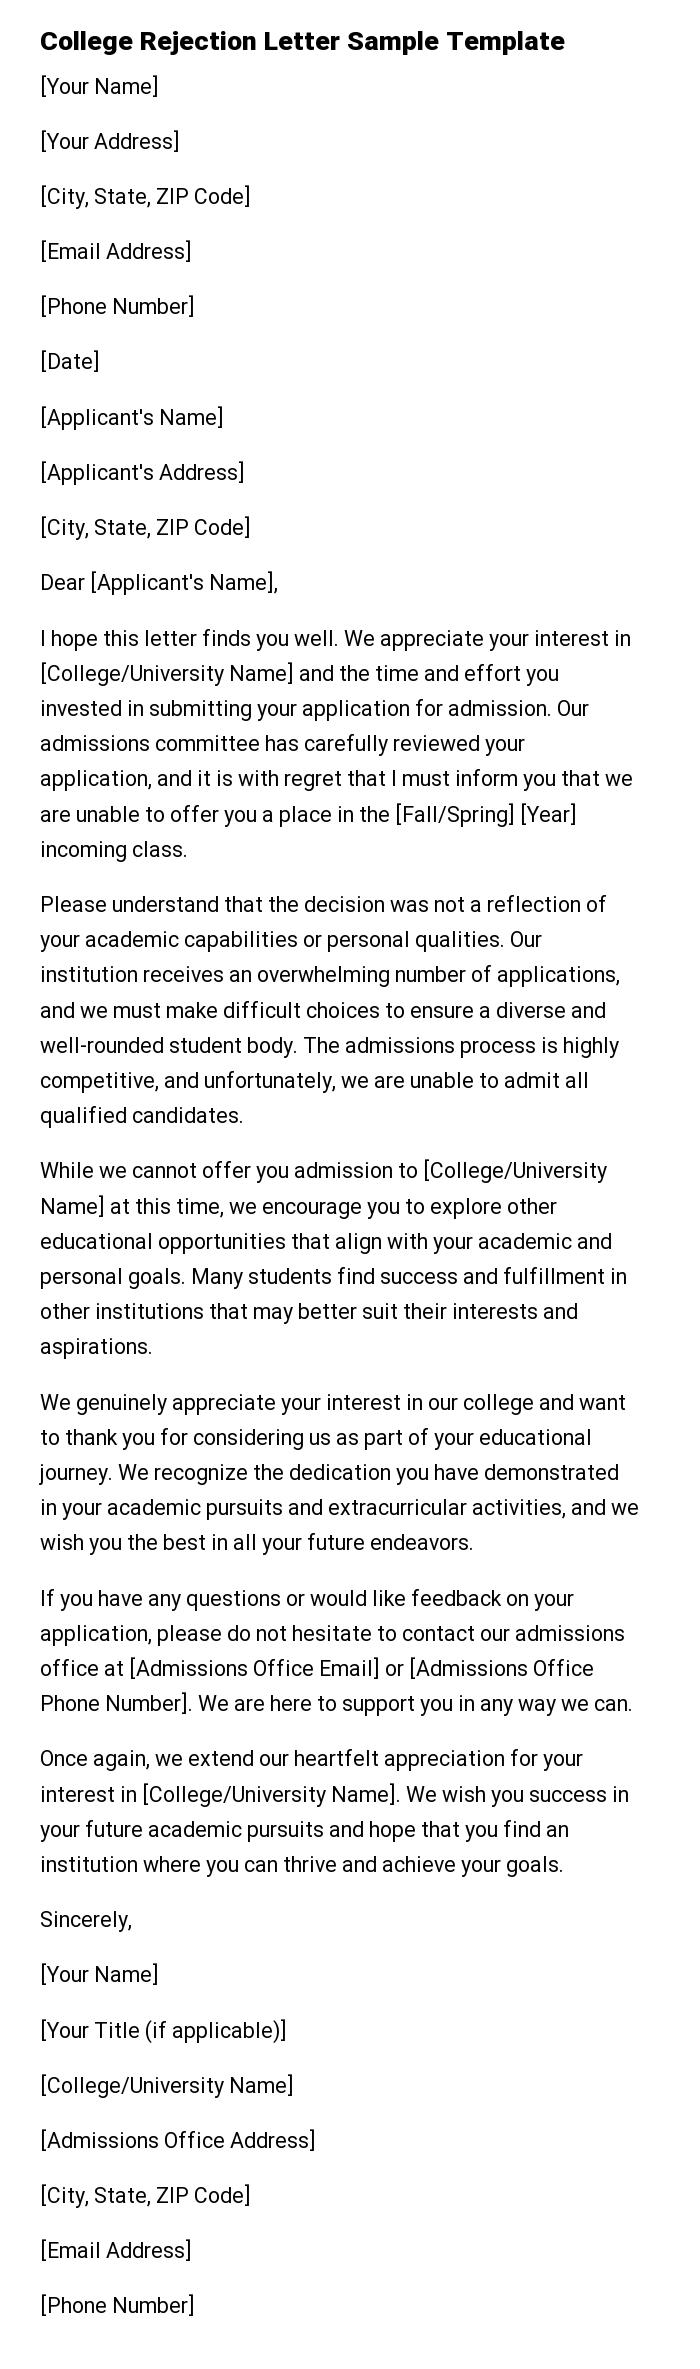 College Rejection Letter Sample Template